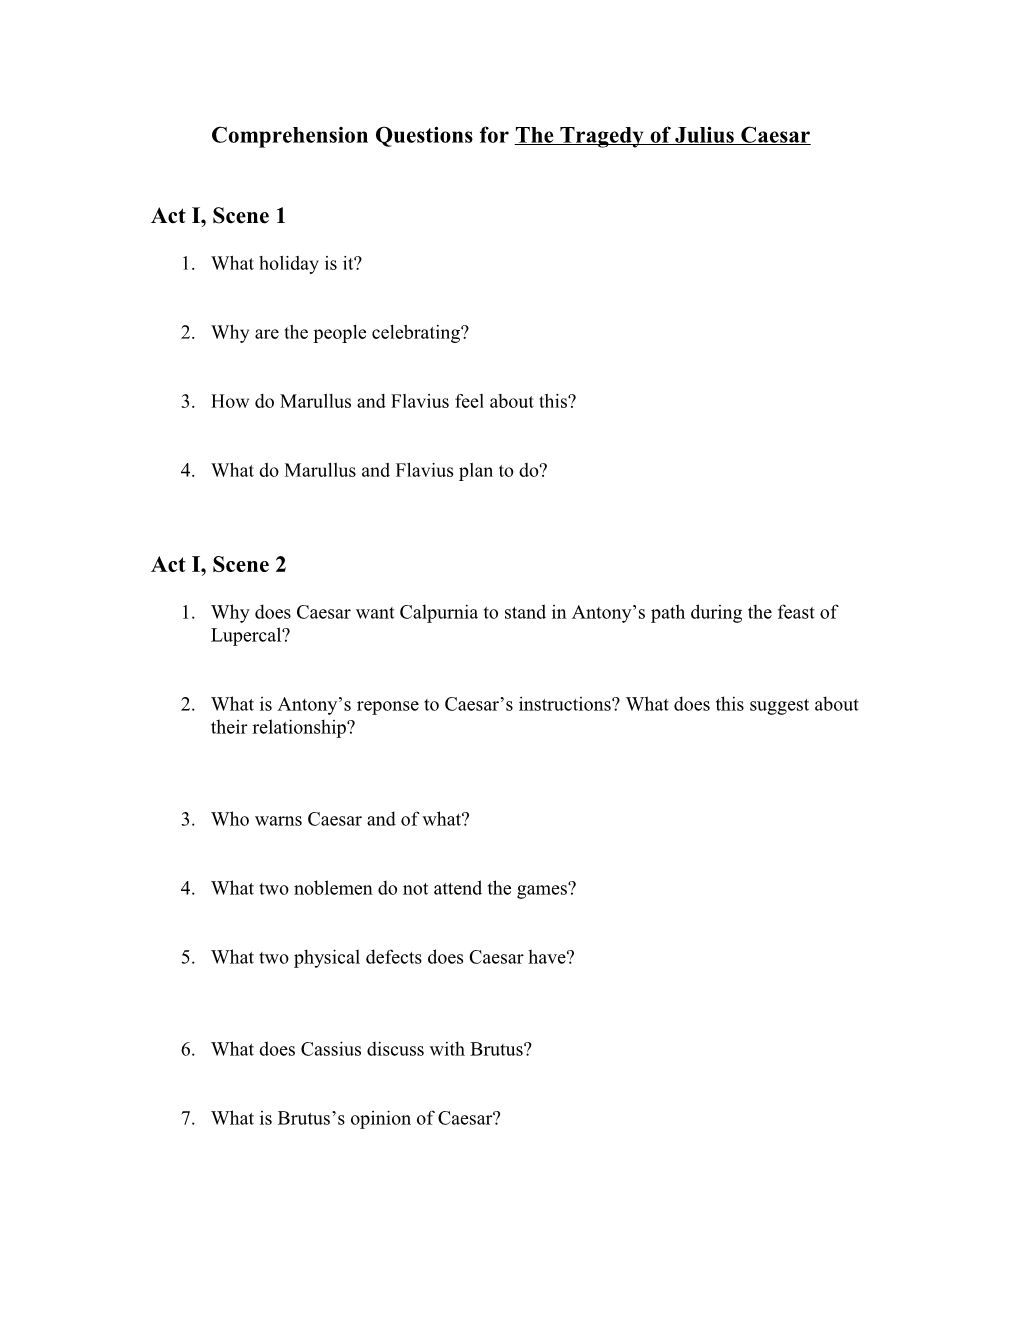 Questions for Act I, Scenes 1 and 2